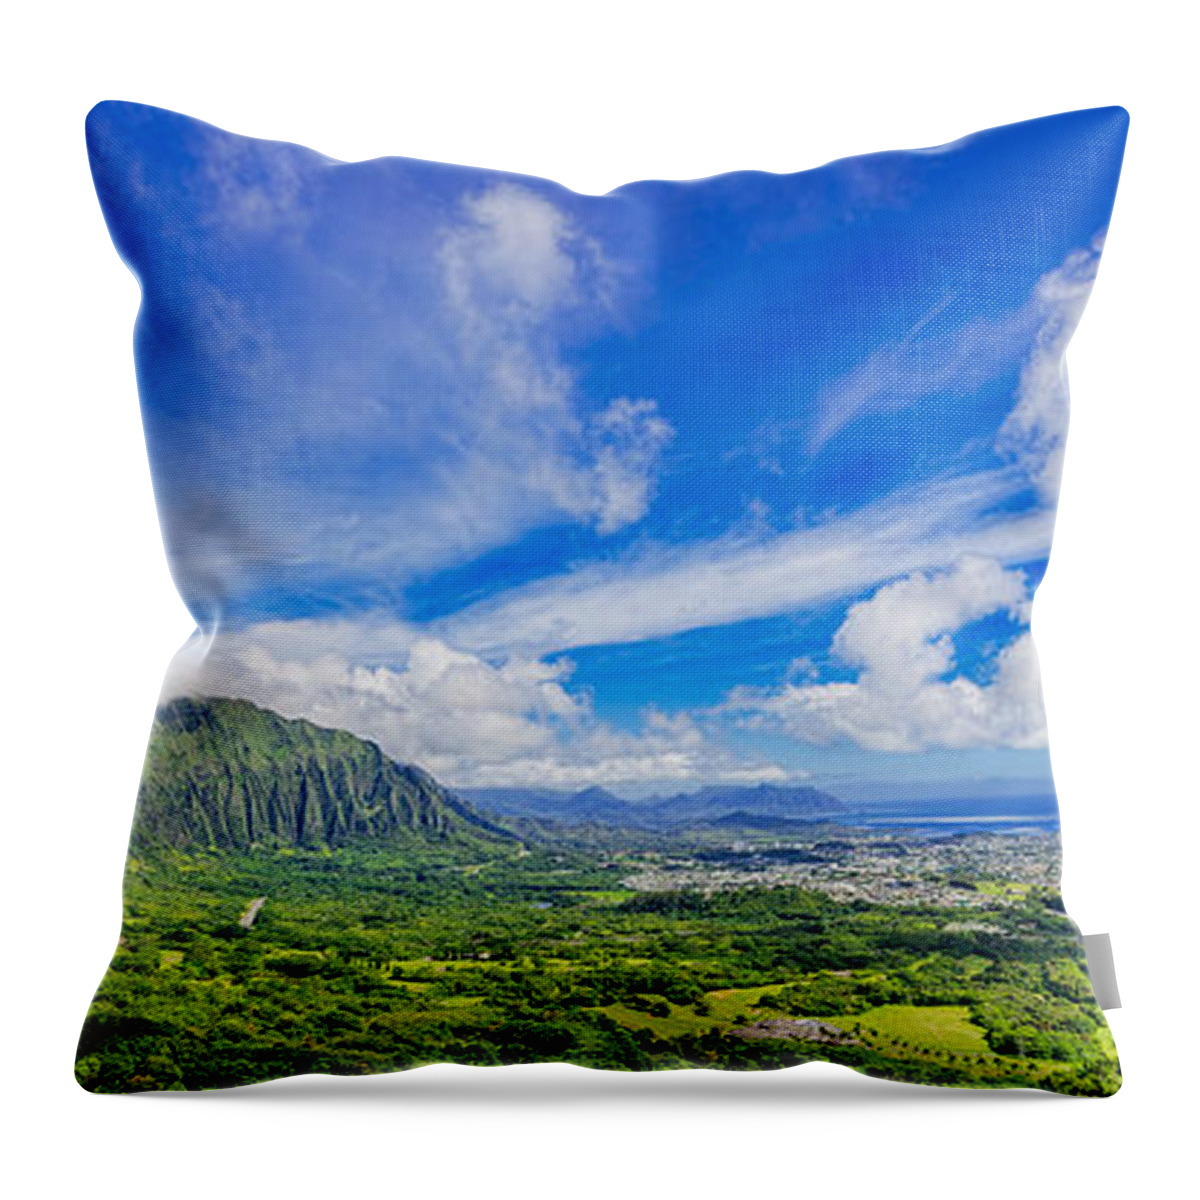 Pali Lookout Throw Pillow featuring the photograph View From the Pali Lookout by Aloha Art